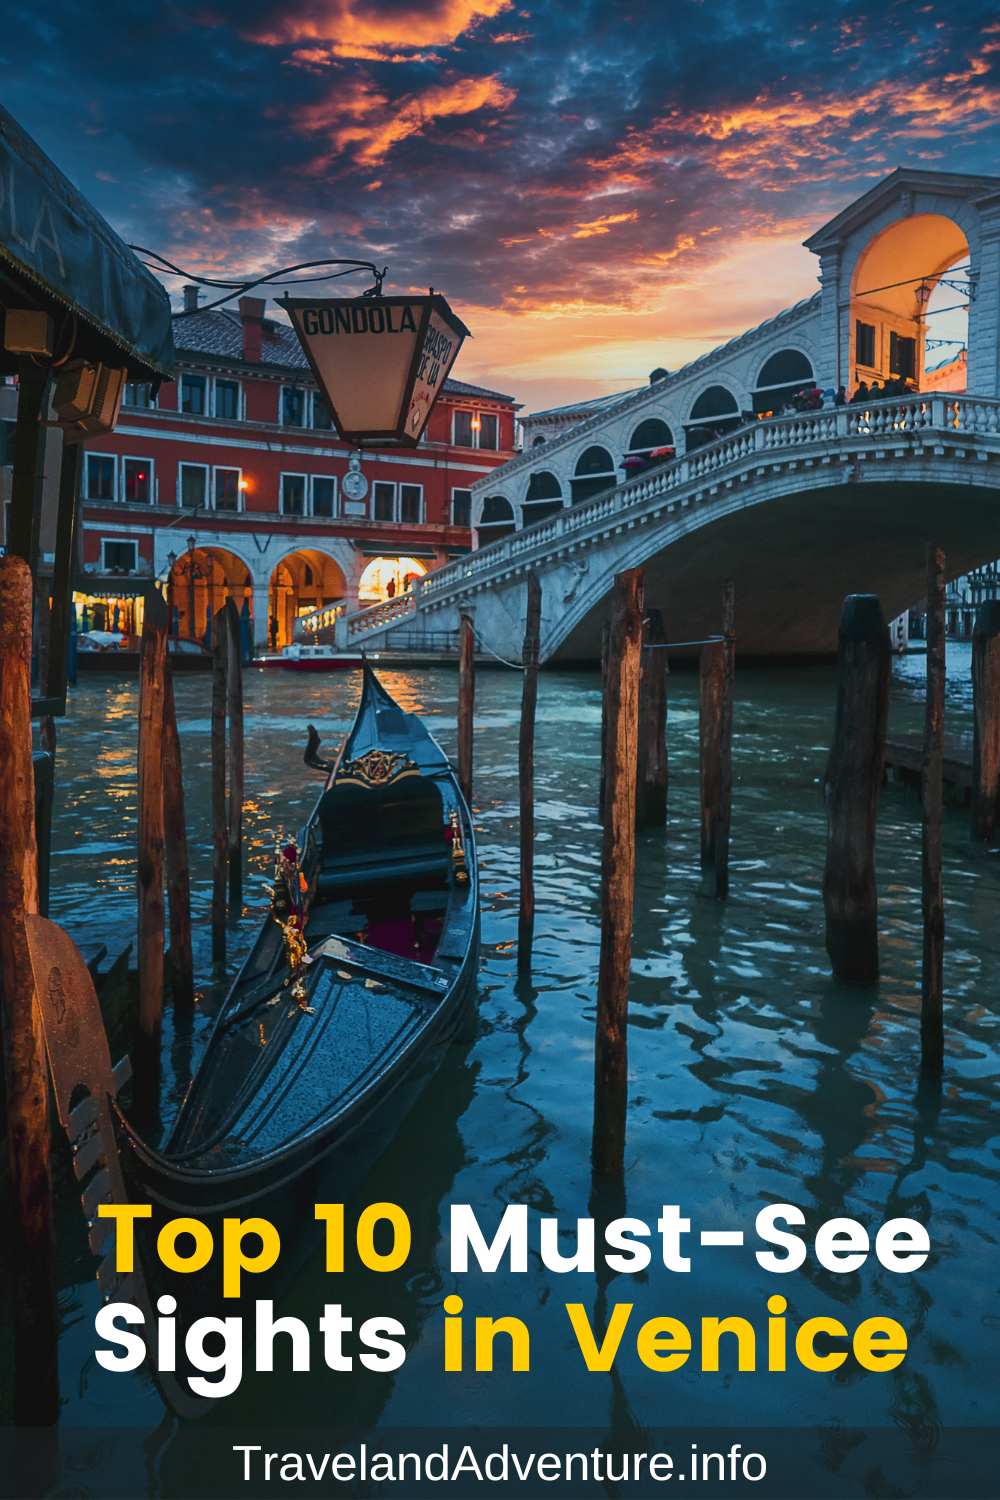 Top 10 Must-See Sights in Venice